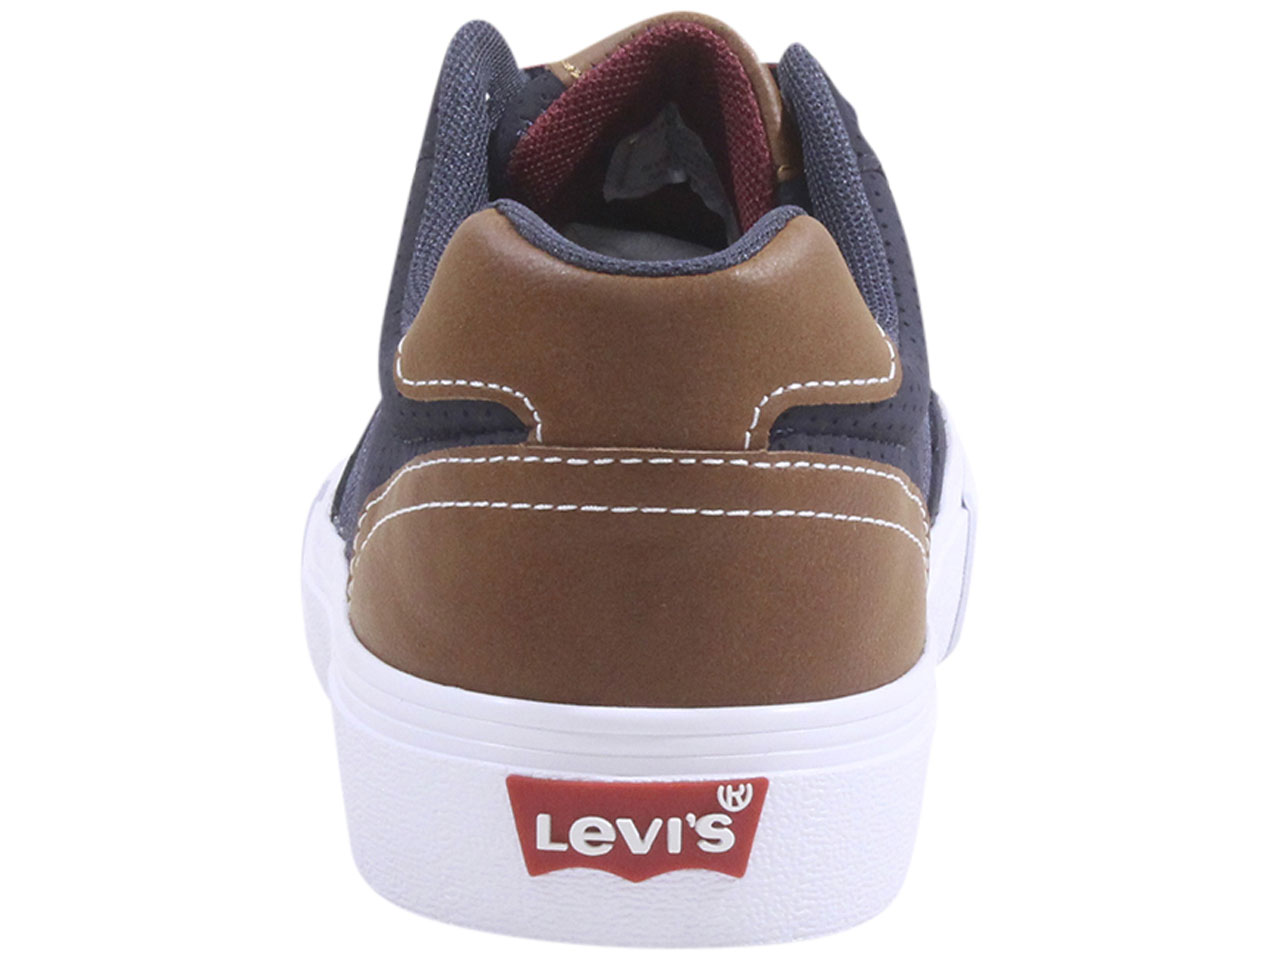 Levis Men's Lancer Sneakers Low Top Lace Up Perforated Navy/Burgundy Sz. 13  